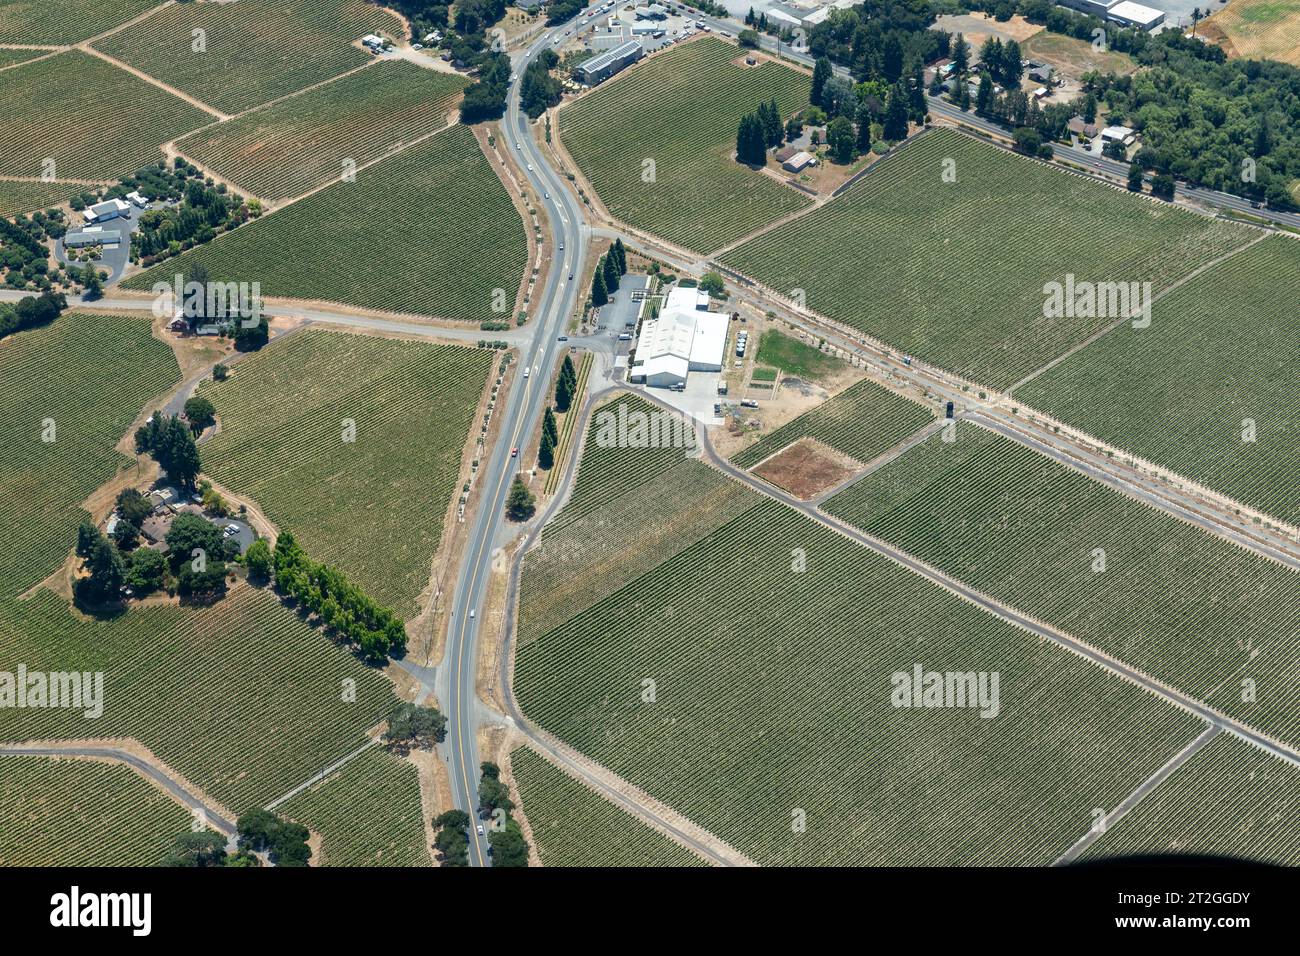 Aerial view of roadways crossing the fertile green crops of norther California vineyards Stock Photo